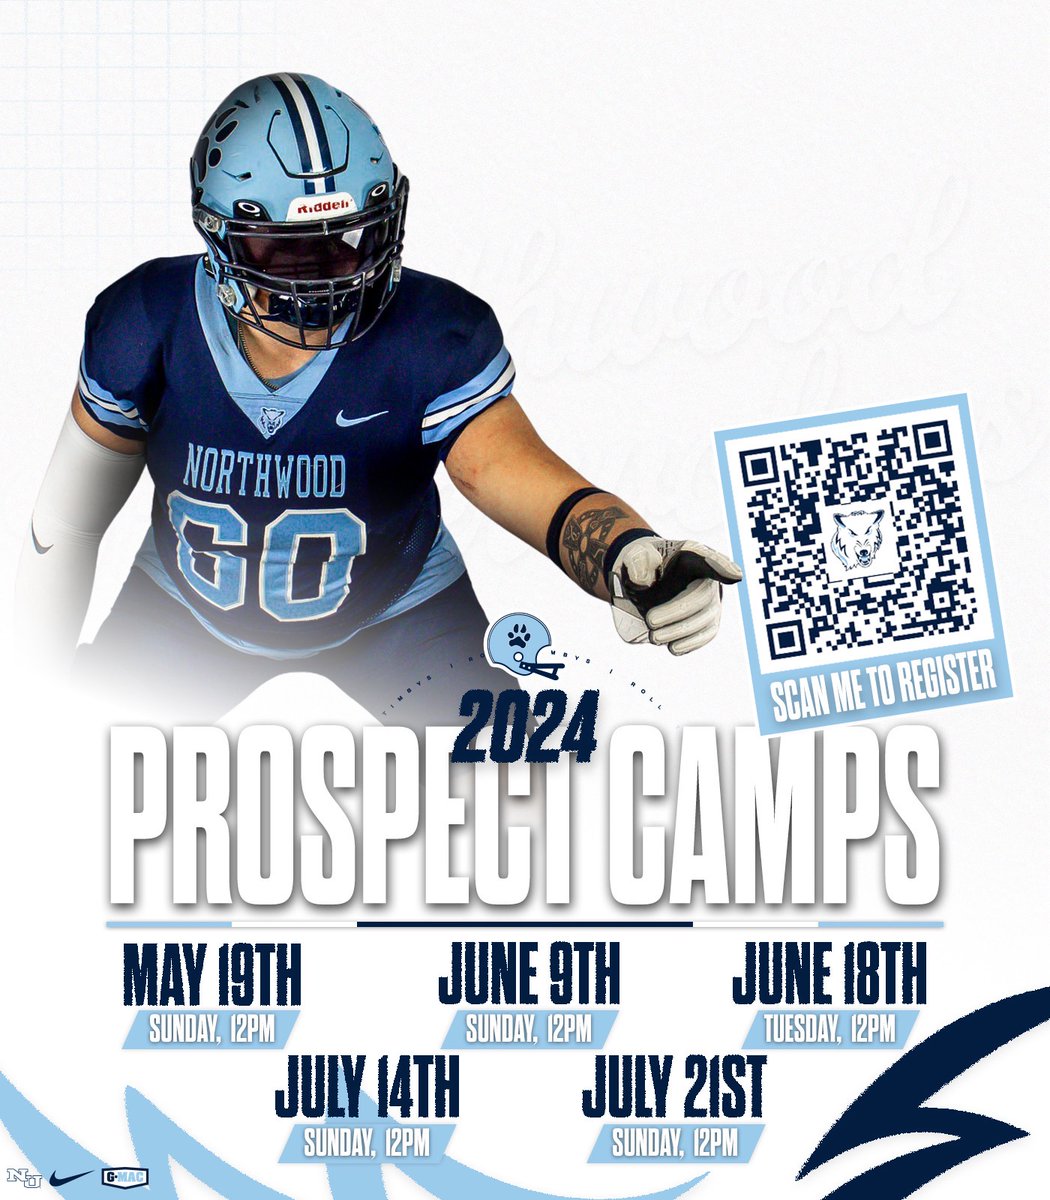 Two weeks out from our first Prospect Camp of 2024! Get Here! Get Coached! Get Better!! #LetItRip